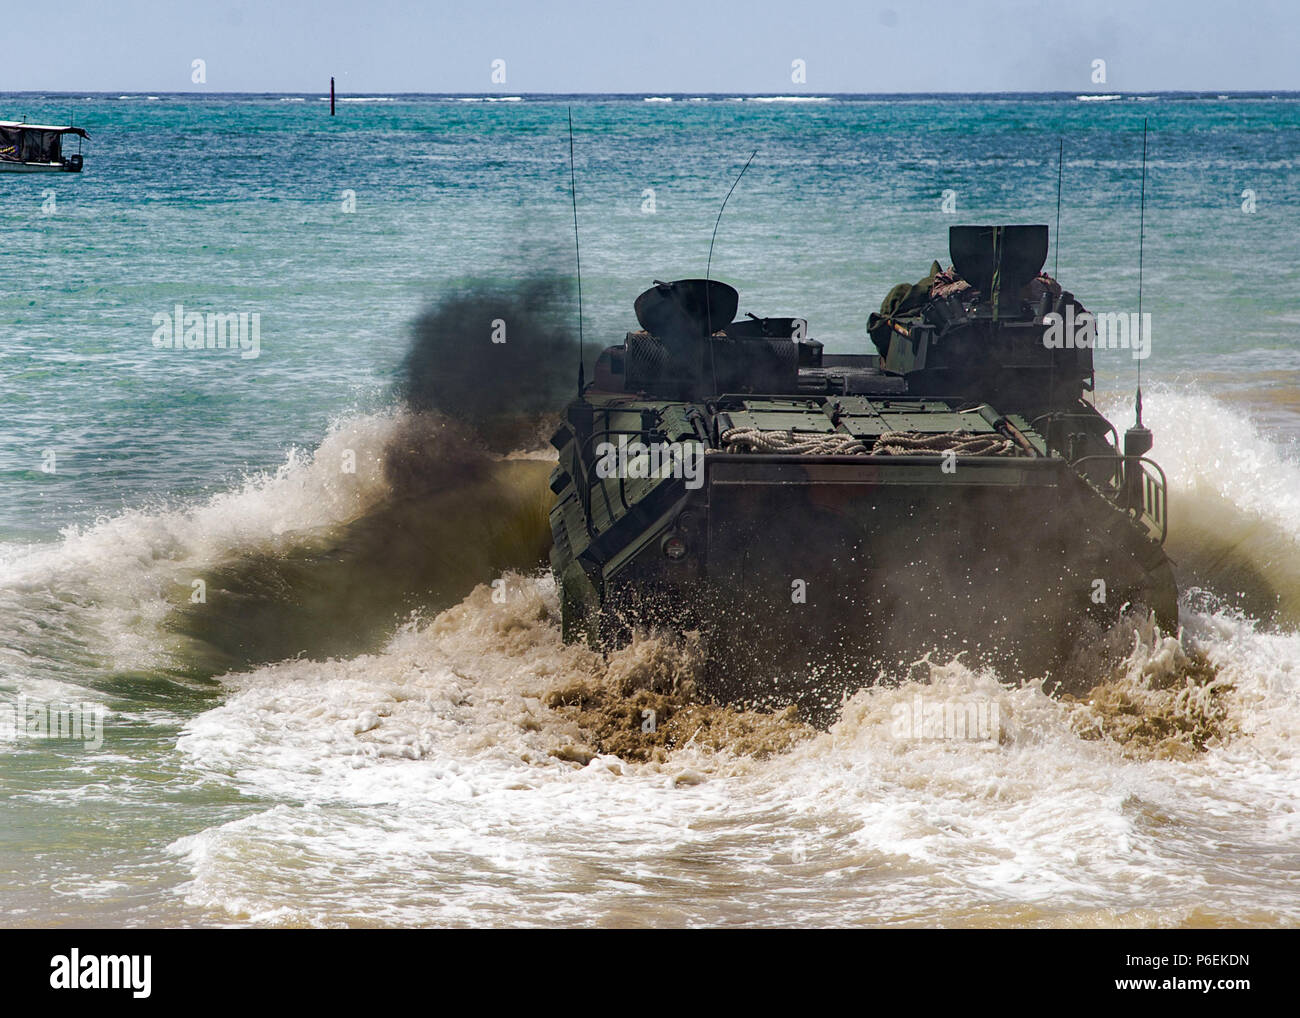 Marines with Bravo Company, 3rd Assault Amphibian Battalion, enter the ocean with their Assault Ampbhibious Vehicle (AAV) on Camp Schwab beach, Okinawa, Japan, June 29, 2018. This training maintains the units readiness and proficiency while on deployment in the Pacific. The company is forward-deployed to the 3rd Marine Division as part of the Unit Deployment Program. (U.S. Marine Corps photo by Lance Cpl. Nathan Maysonet) Stock Photo